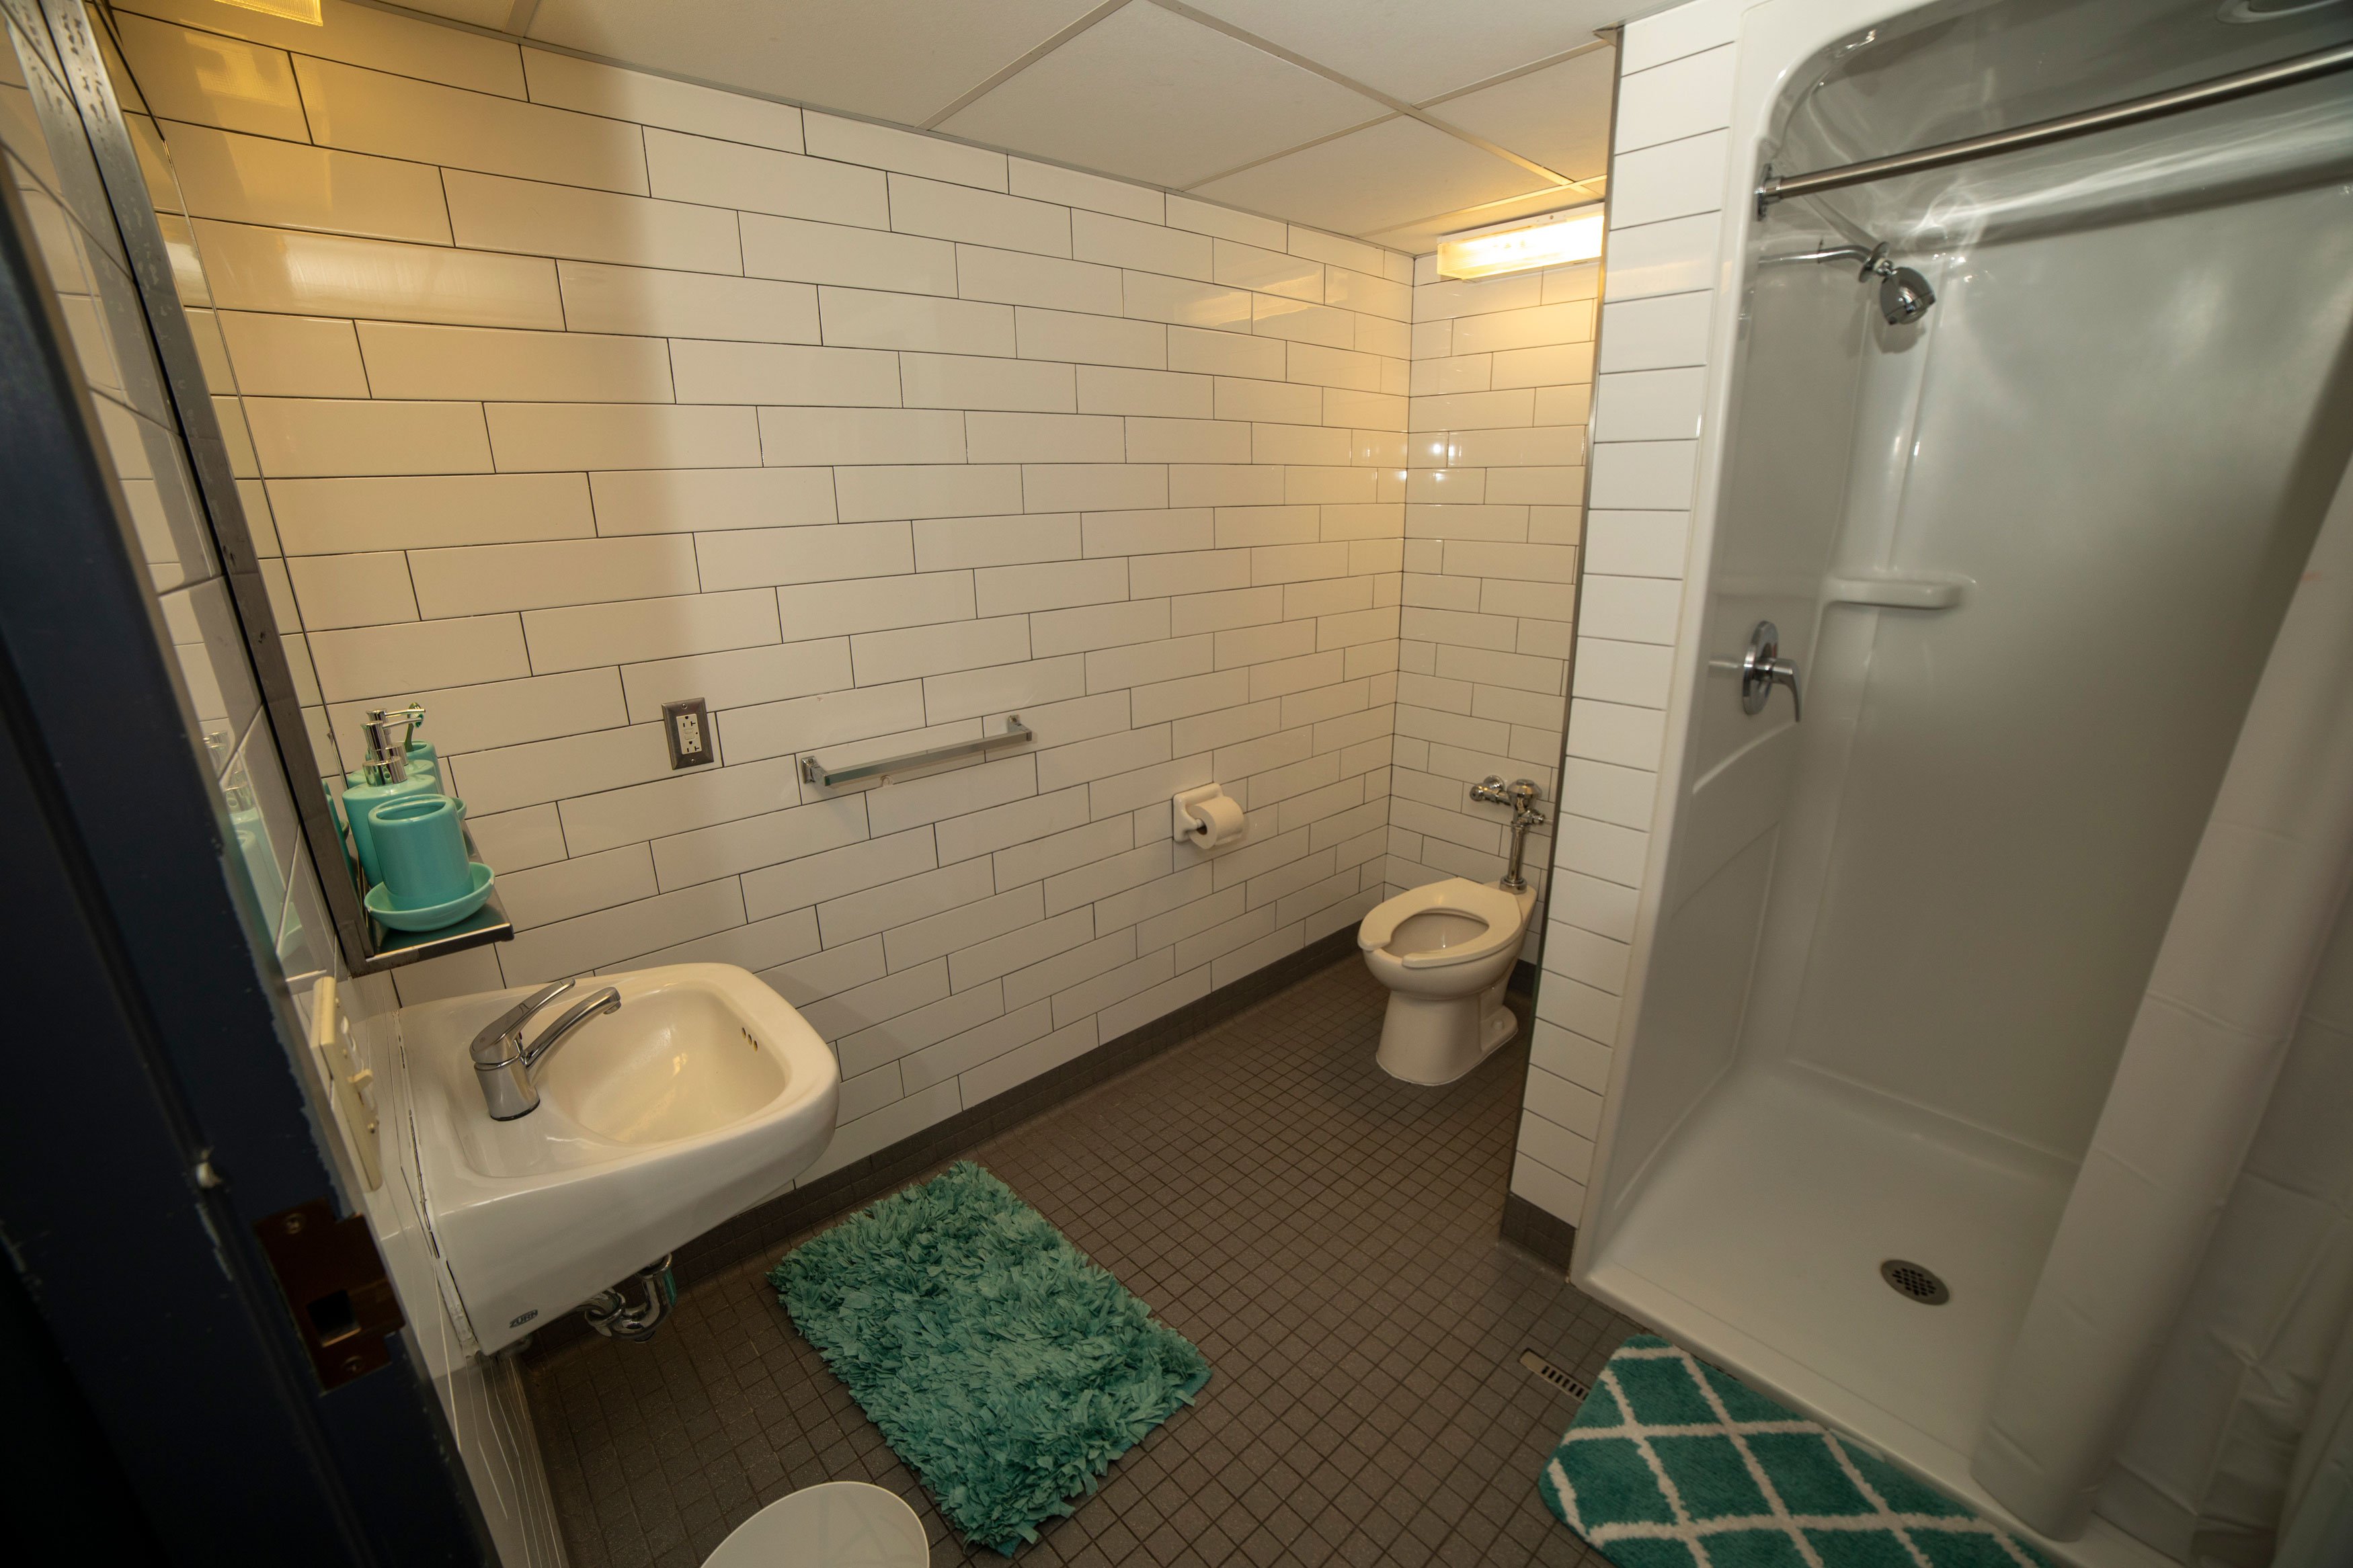 A bathroom with a walk-in shower, toilet and sink. The wall tiles and fixtures are white, the floor tiles are brown and there are turquoise bath maps and soap dispensers.